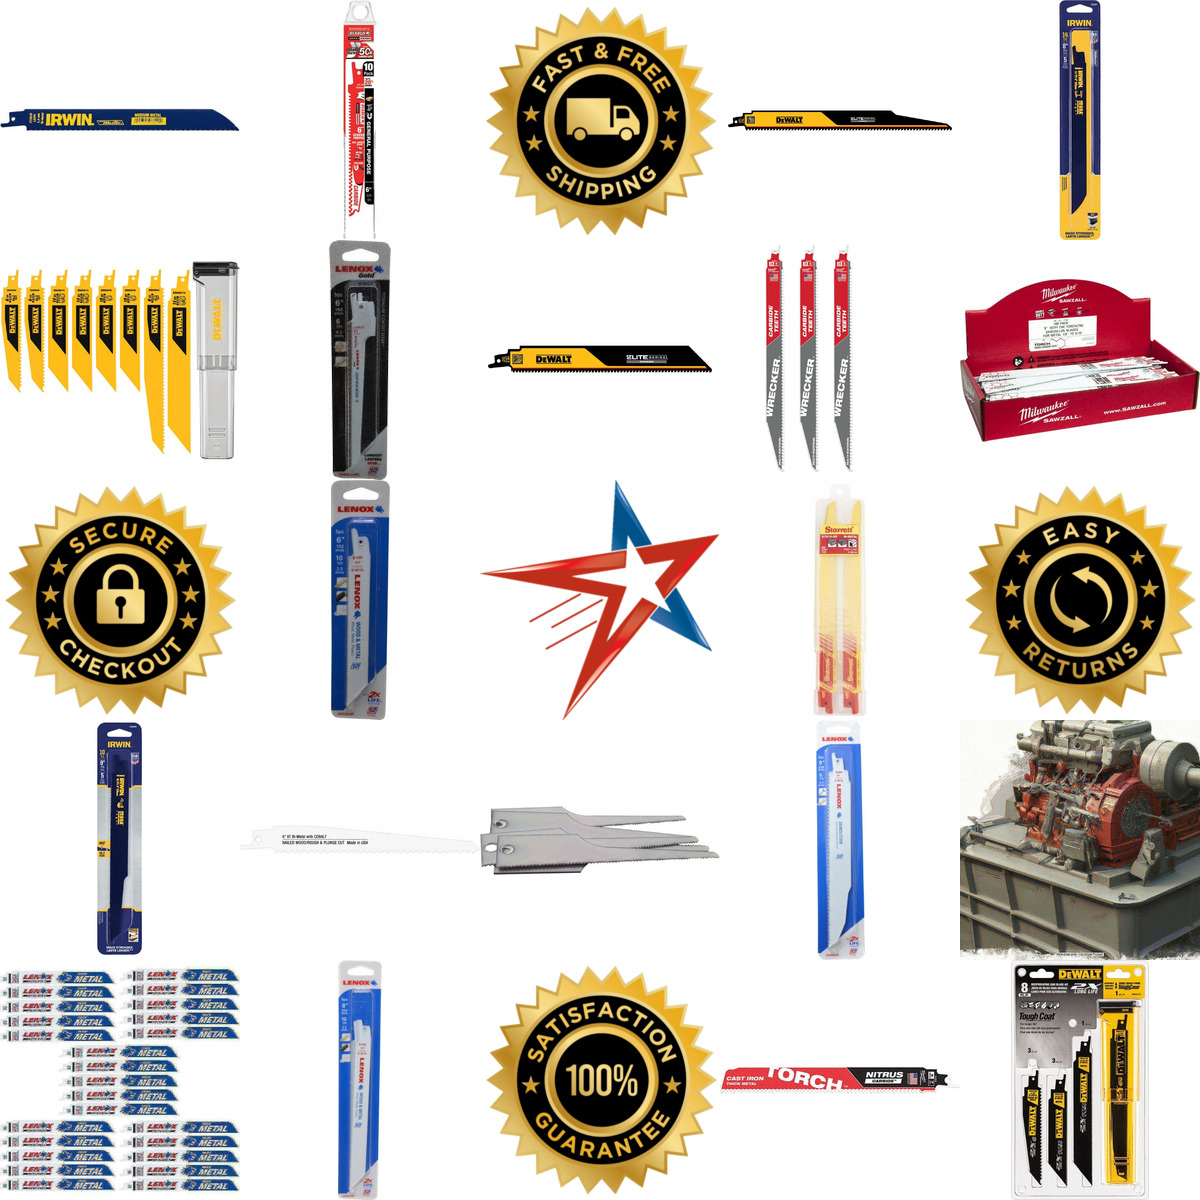 A selection of Reciprocating Saw Blades products on GoVets